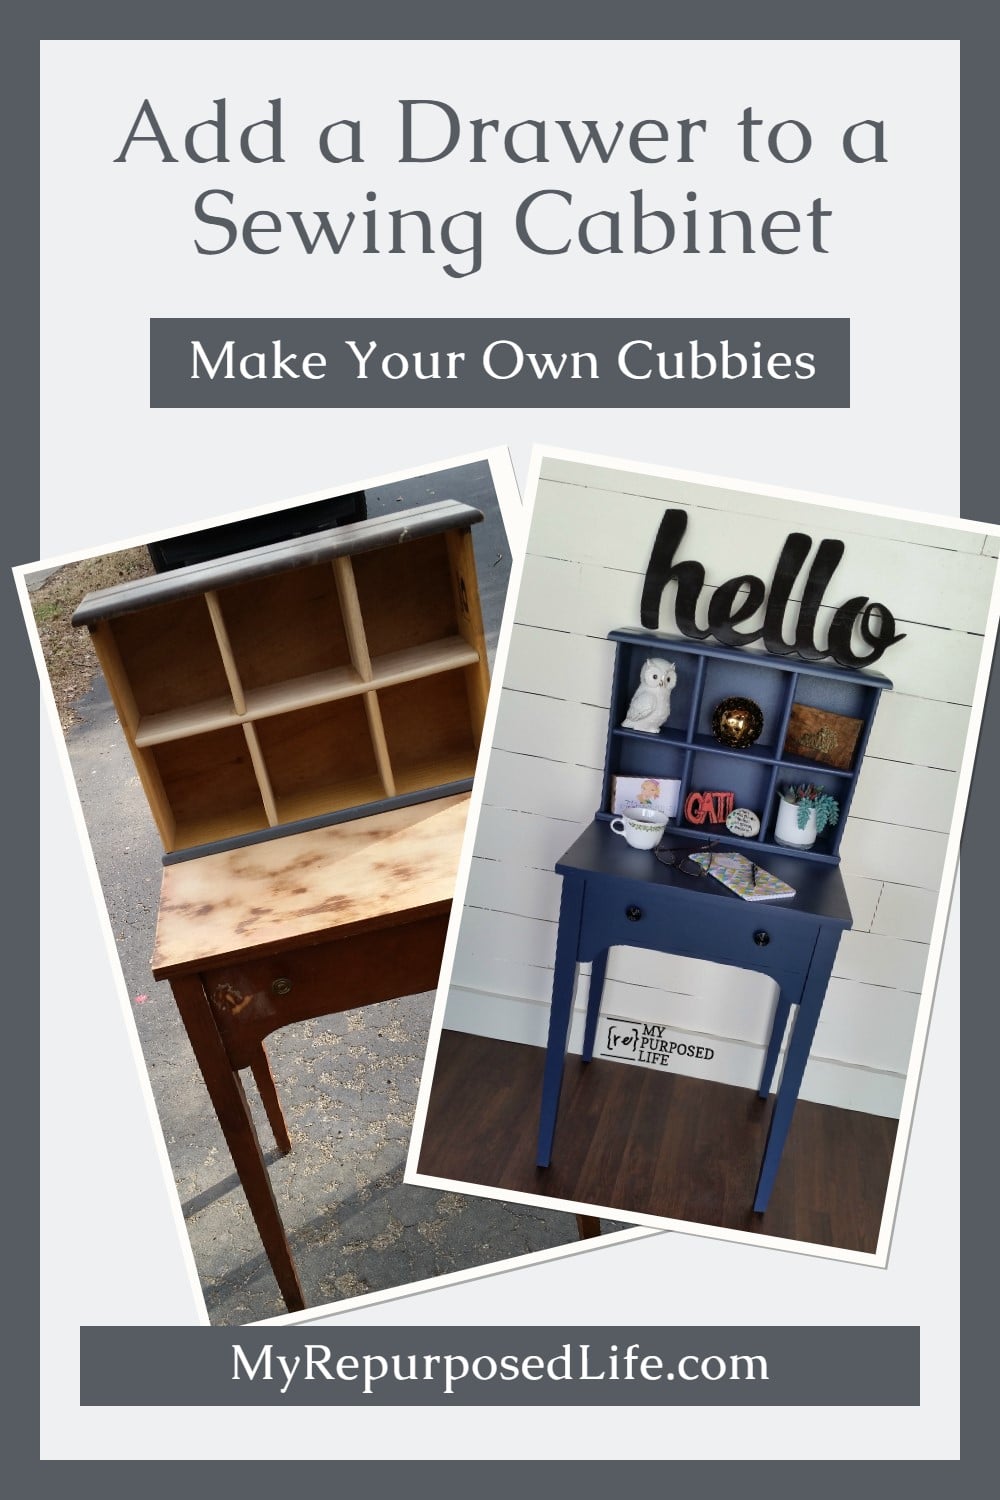 How to marry a sewing machine cabinet and a repurposed drawer to make this small navy blue writing desk. Step by step directions to make something similar for your own home. #MyRepurposedLife #repurposed #furniture #sewingcabinet #writingdesk #desk #diy #project via @repurposedlife